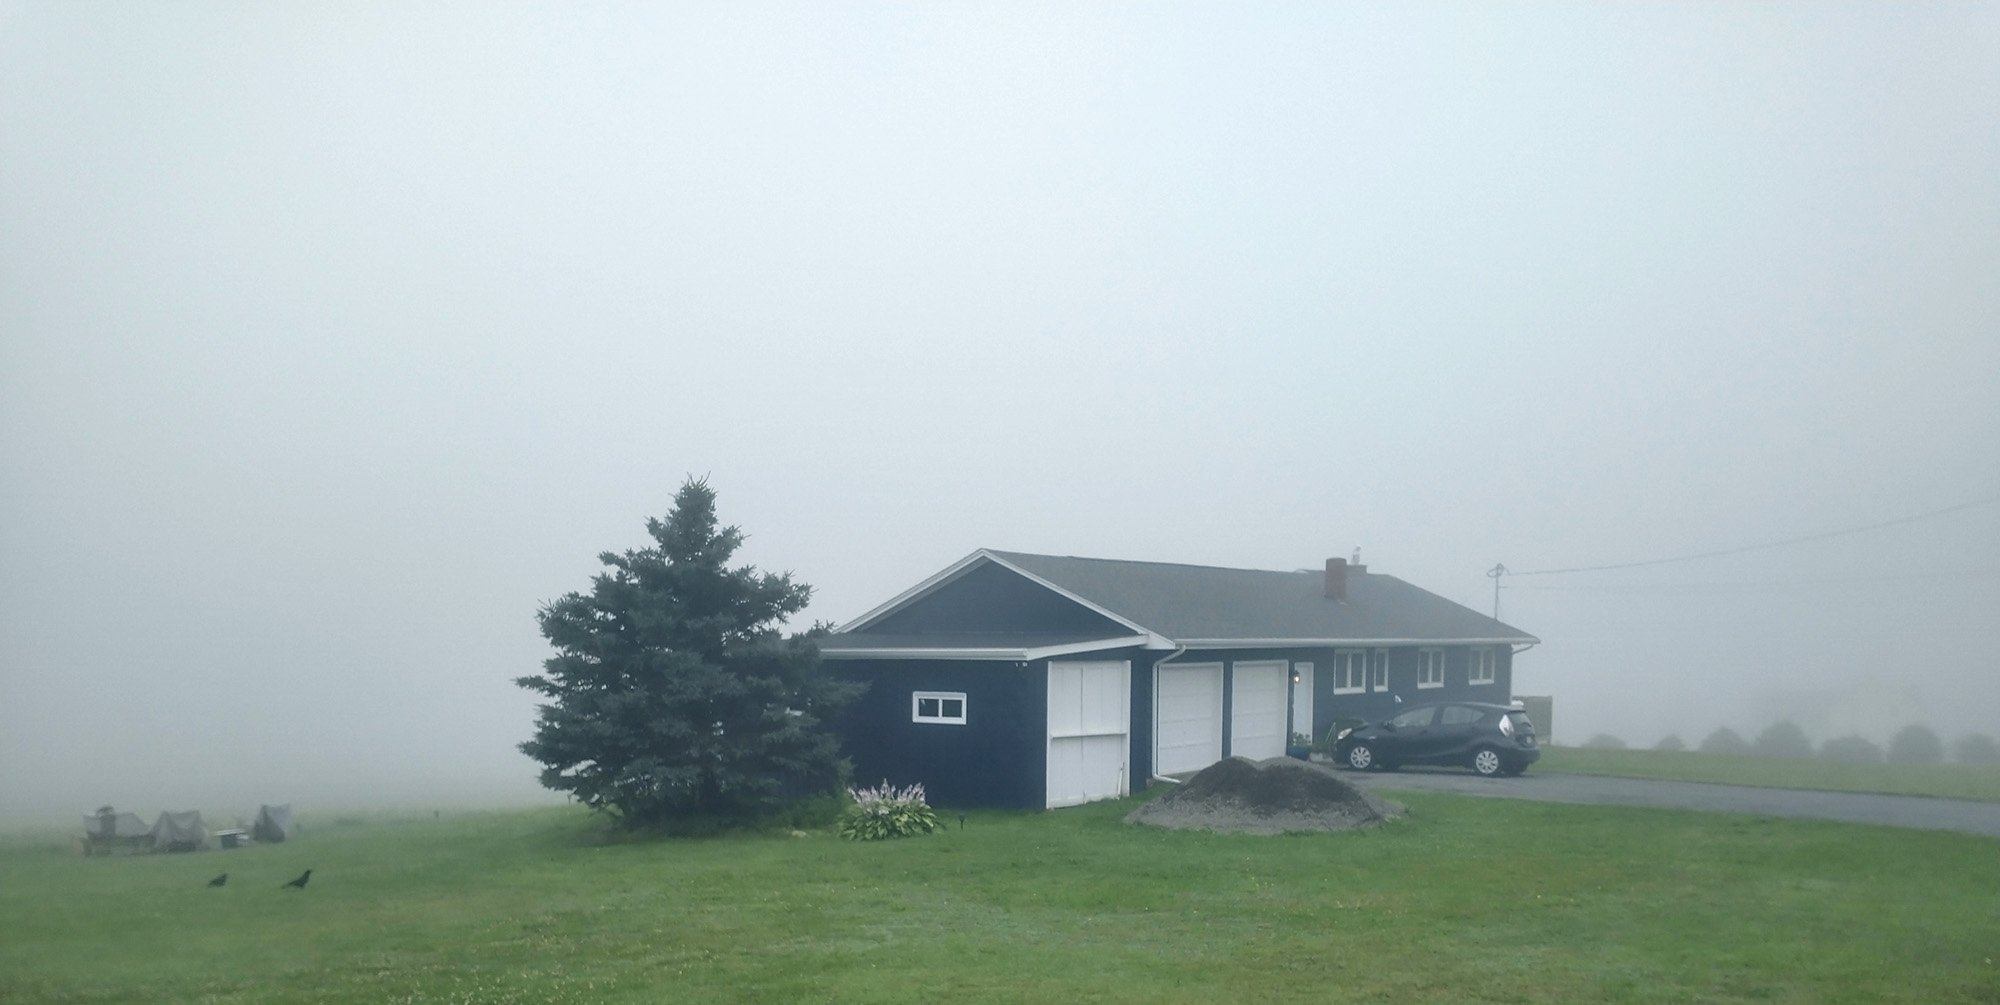 On the other side of the hill I entered a deep patch of nice cool fog. Apparently morning fog is a Nova Scotia thing.